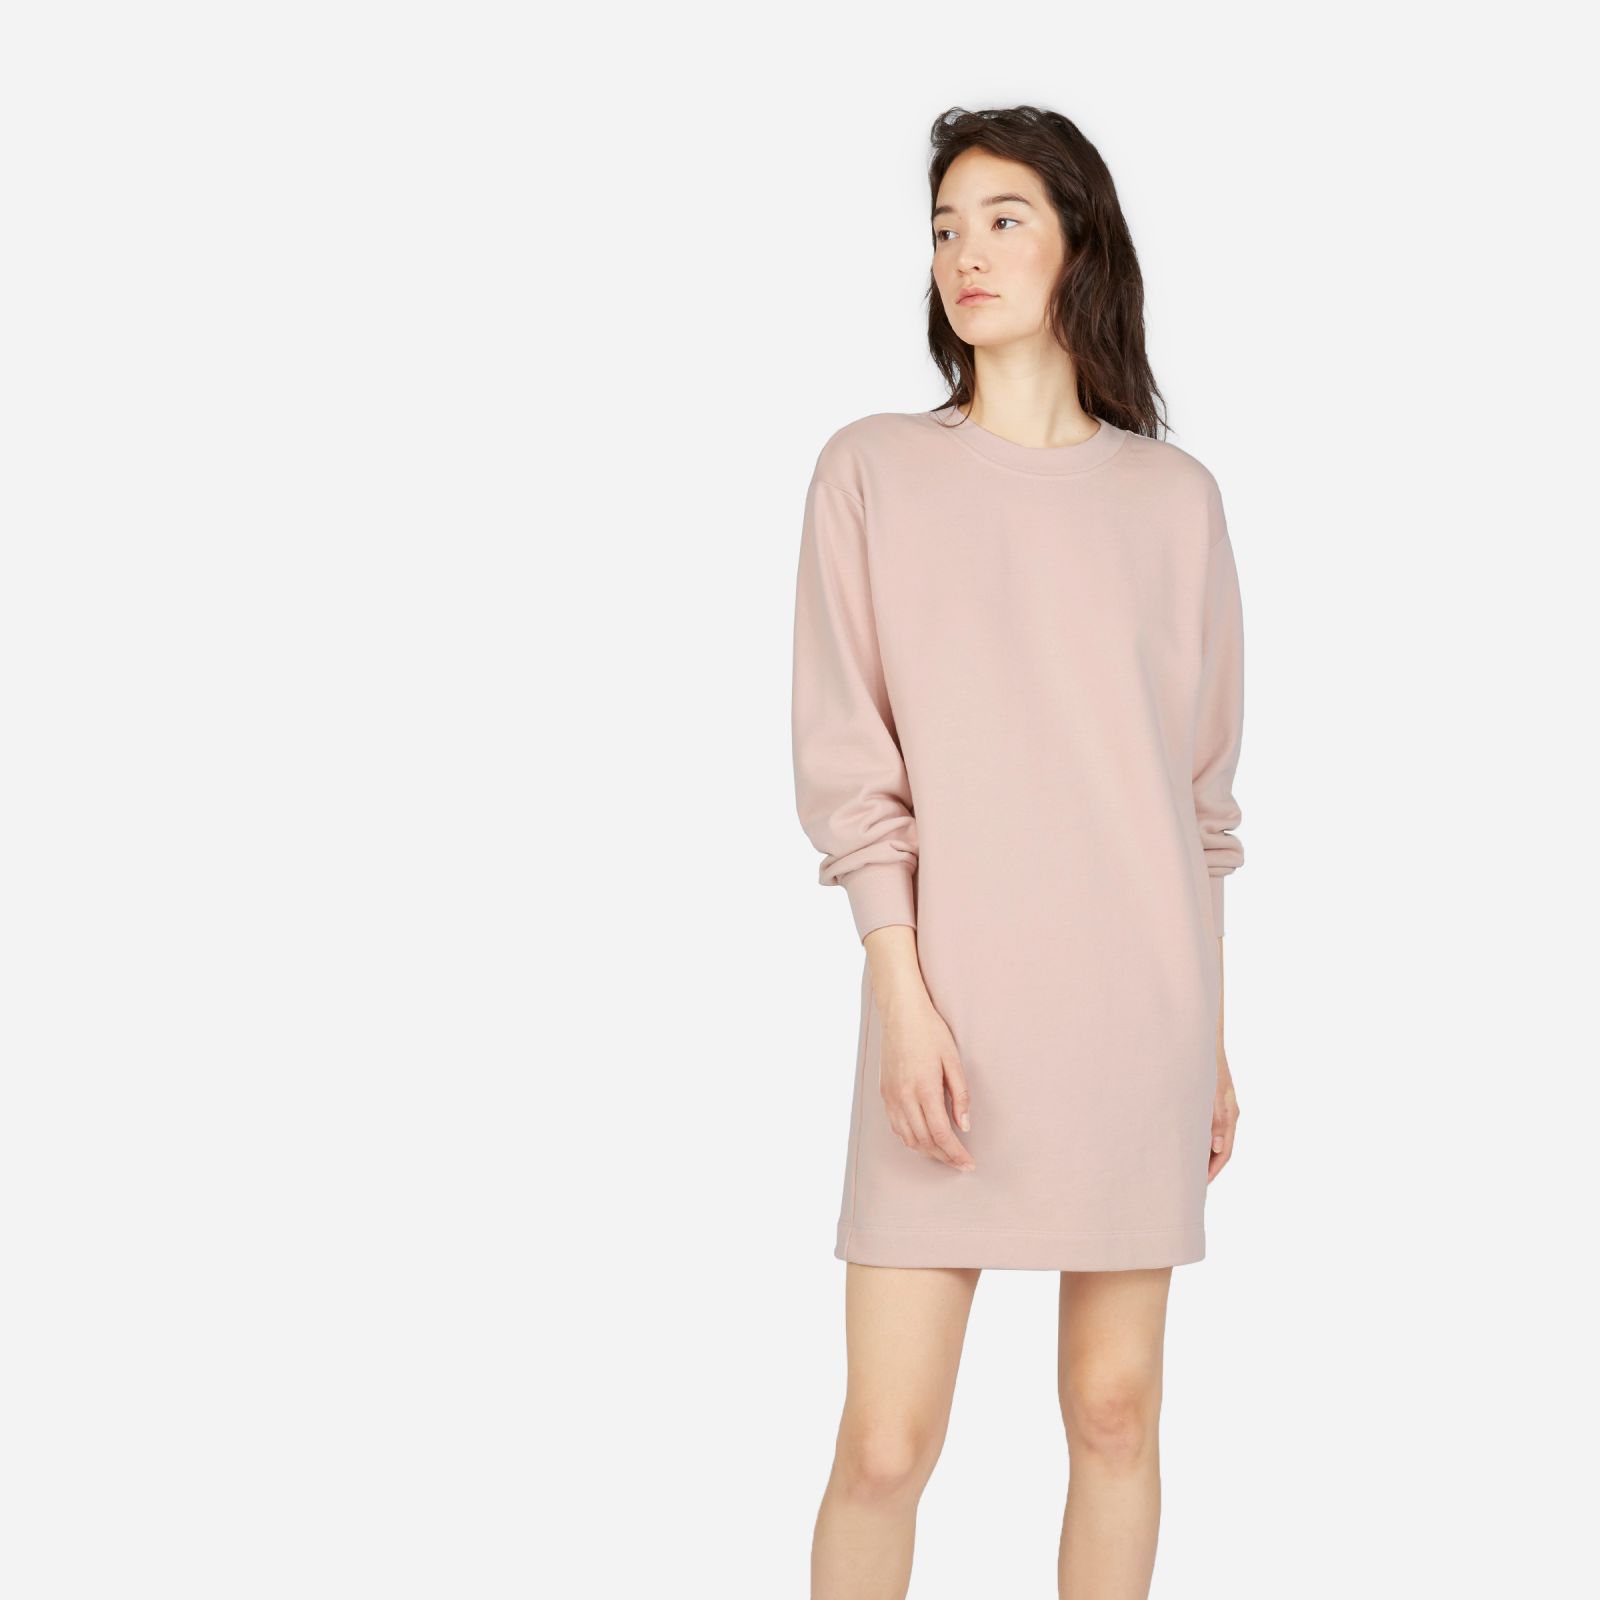 Women's Classic French Terry Crew Neck Dress Sweater by Everlane in Rose, Size XS | Everlane